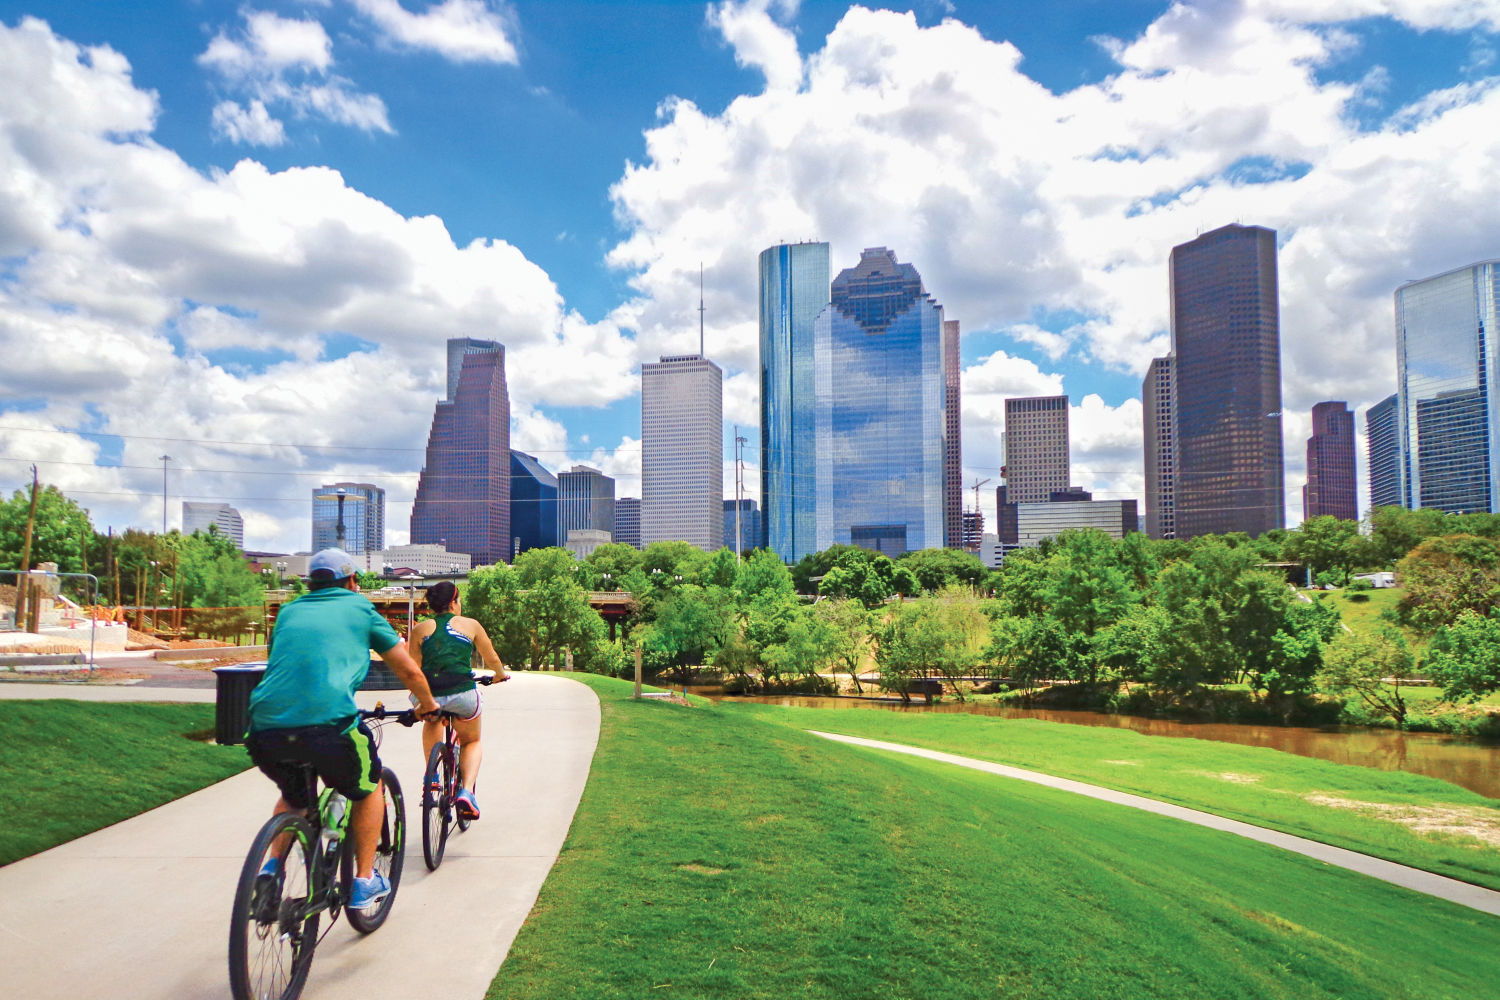 THINGS TO DO IN HOUSTON